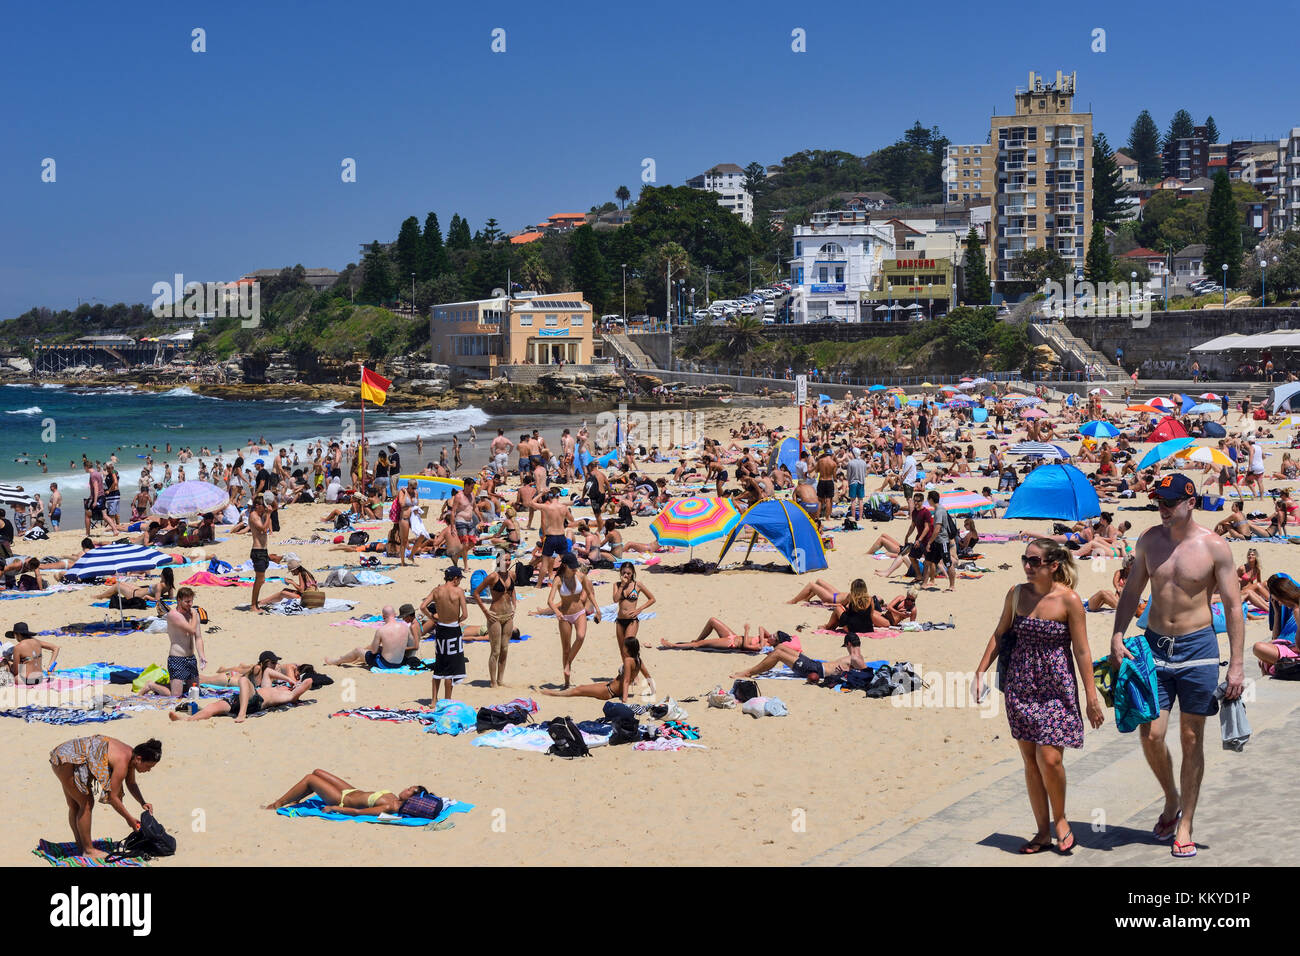 Sunbathers on Coogee Beach, Coogee, an eastern suburb of Sydney, New South Wales, Australia Stock Photo